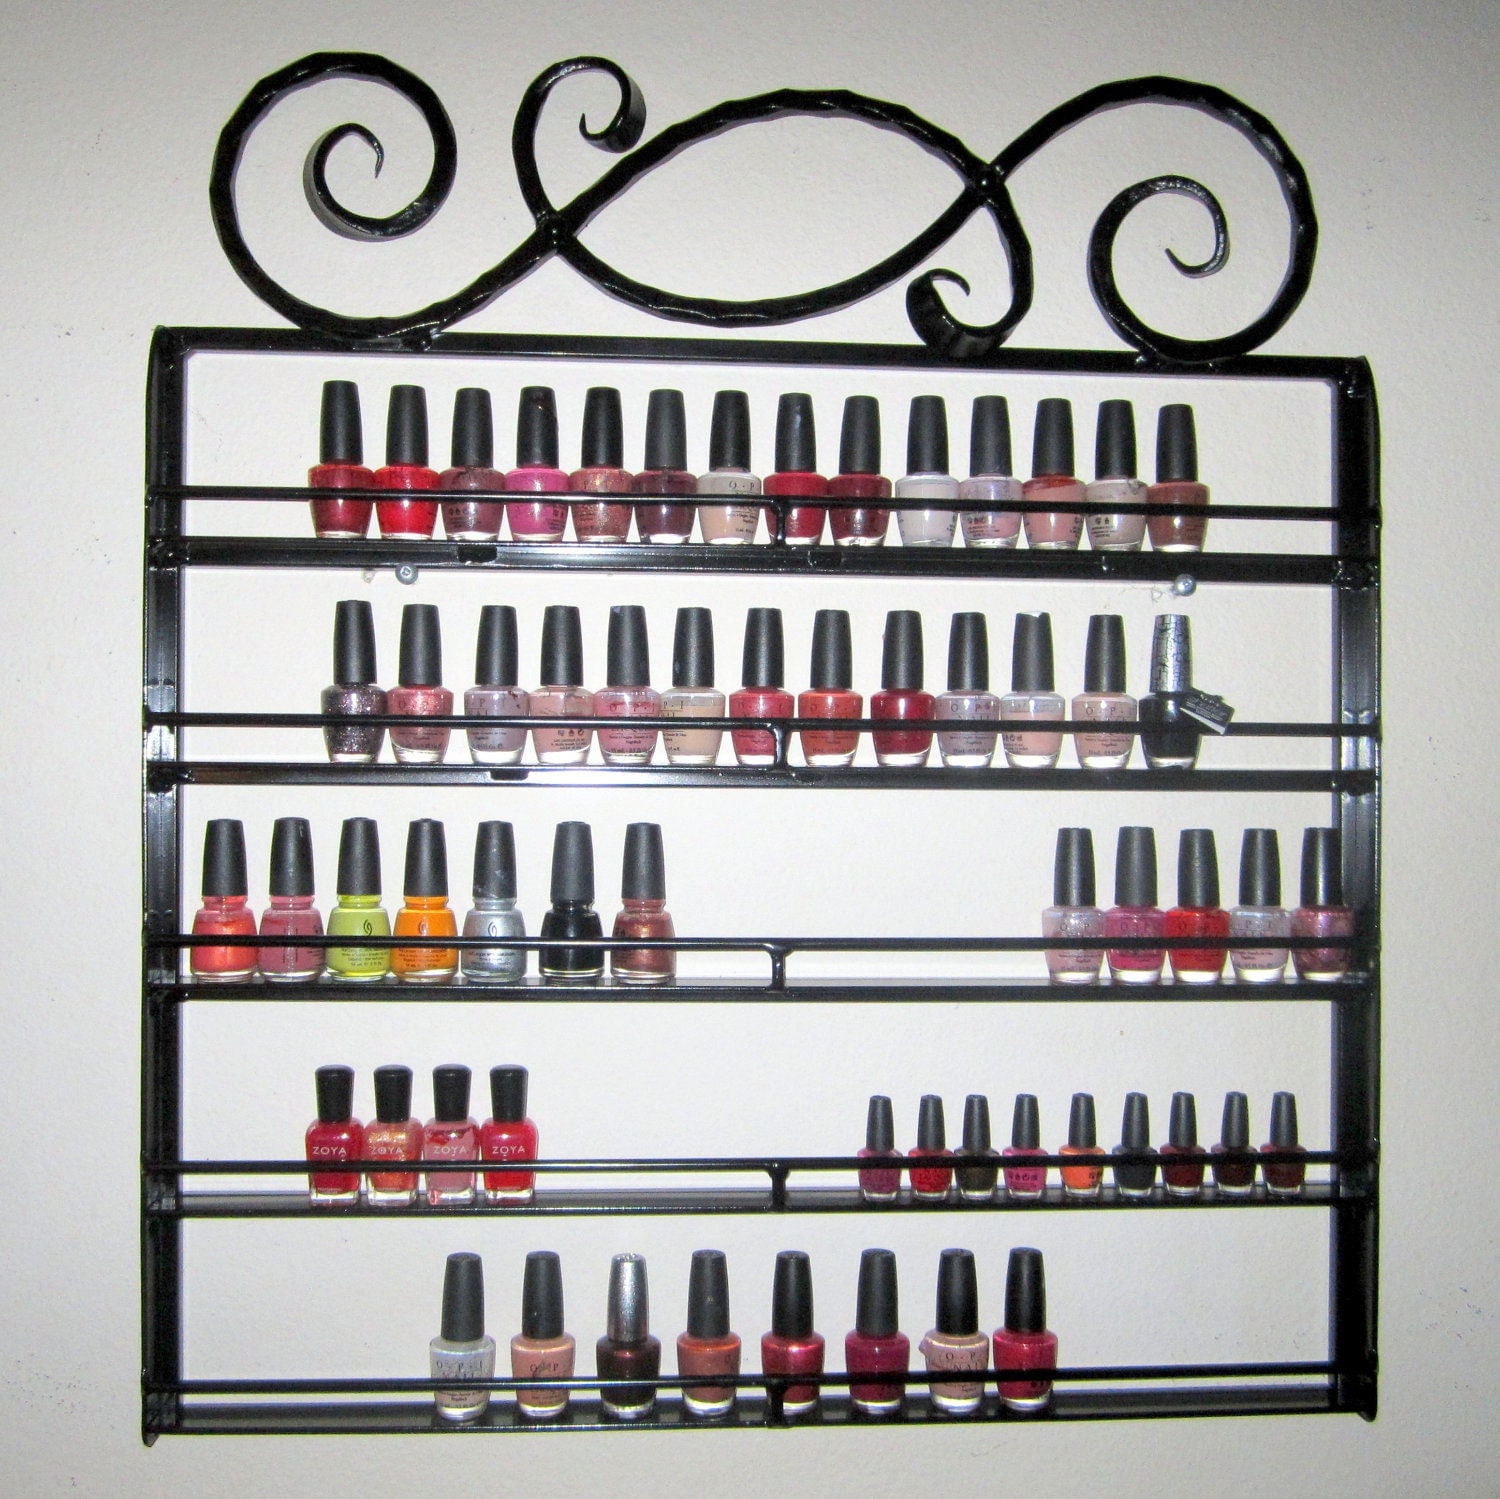 Hanging Wall Nail Polish Rack, Catch the Wave, Wrought Iron, 90 bottles